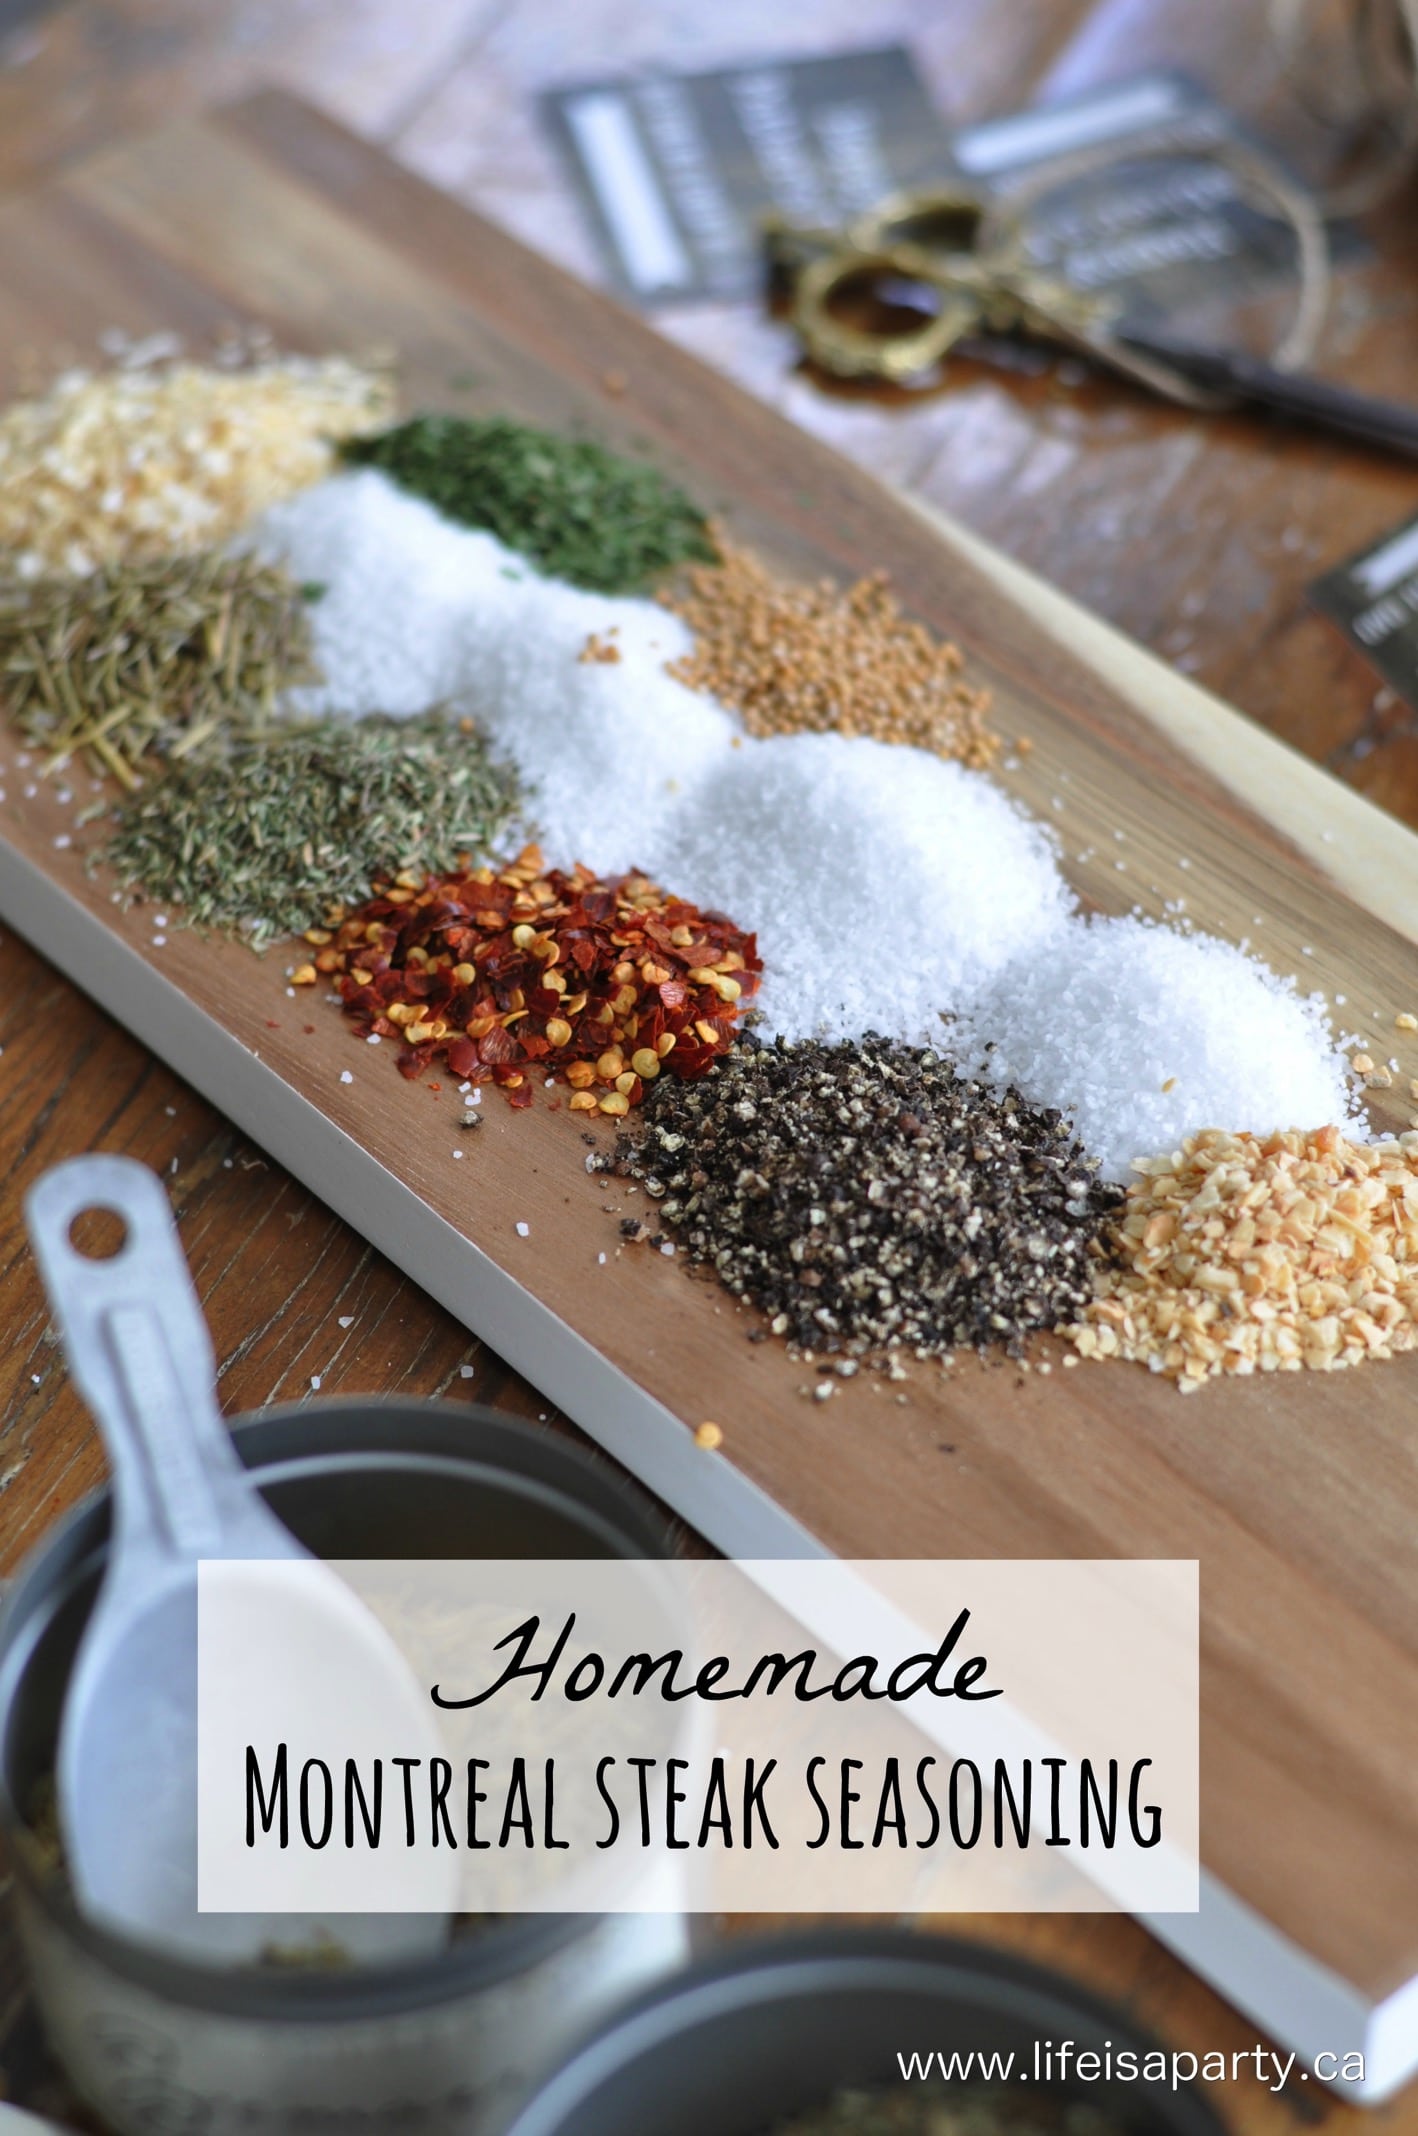 Homemade Montreal Steak Seasoning: Easy to make and delicious recipe, plus free printable Father's Day gift labels.